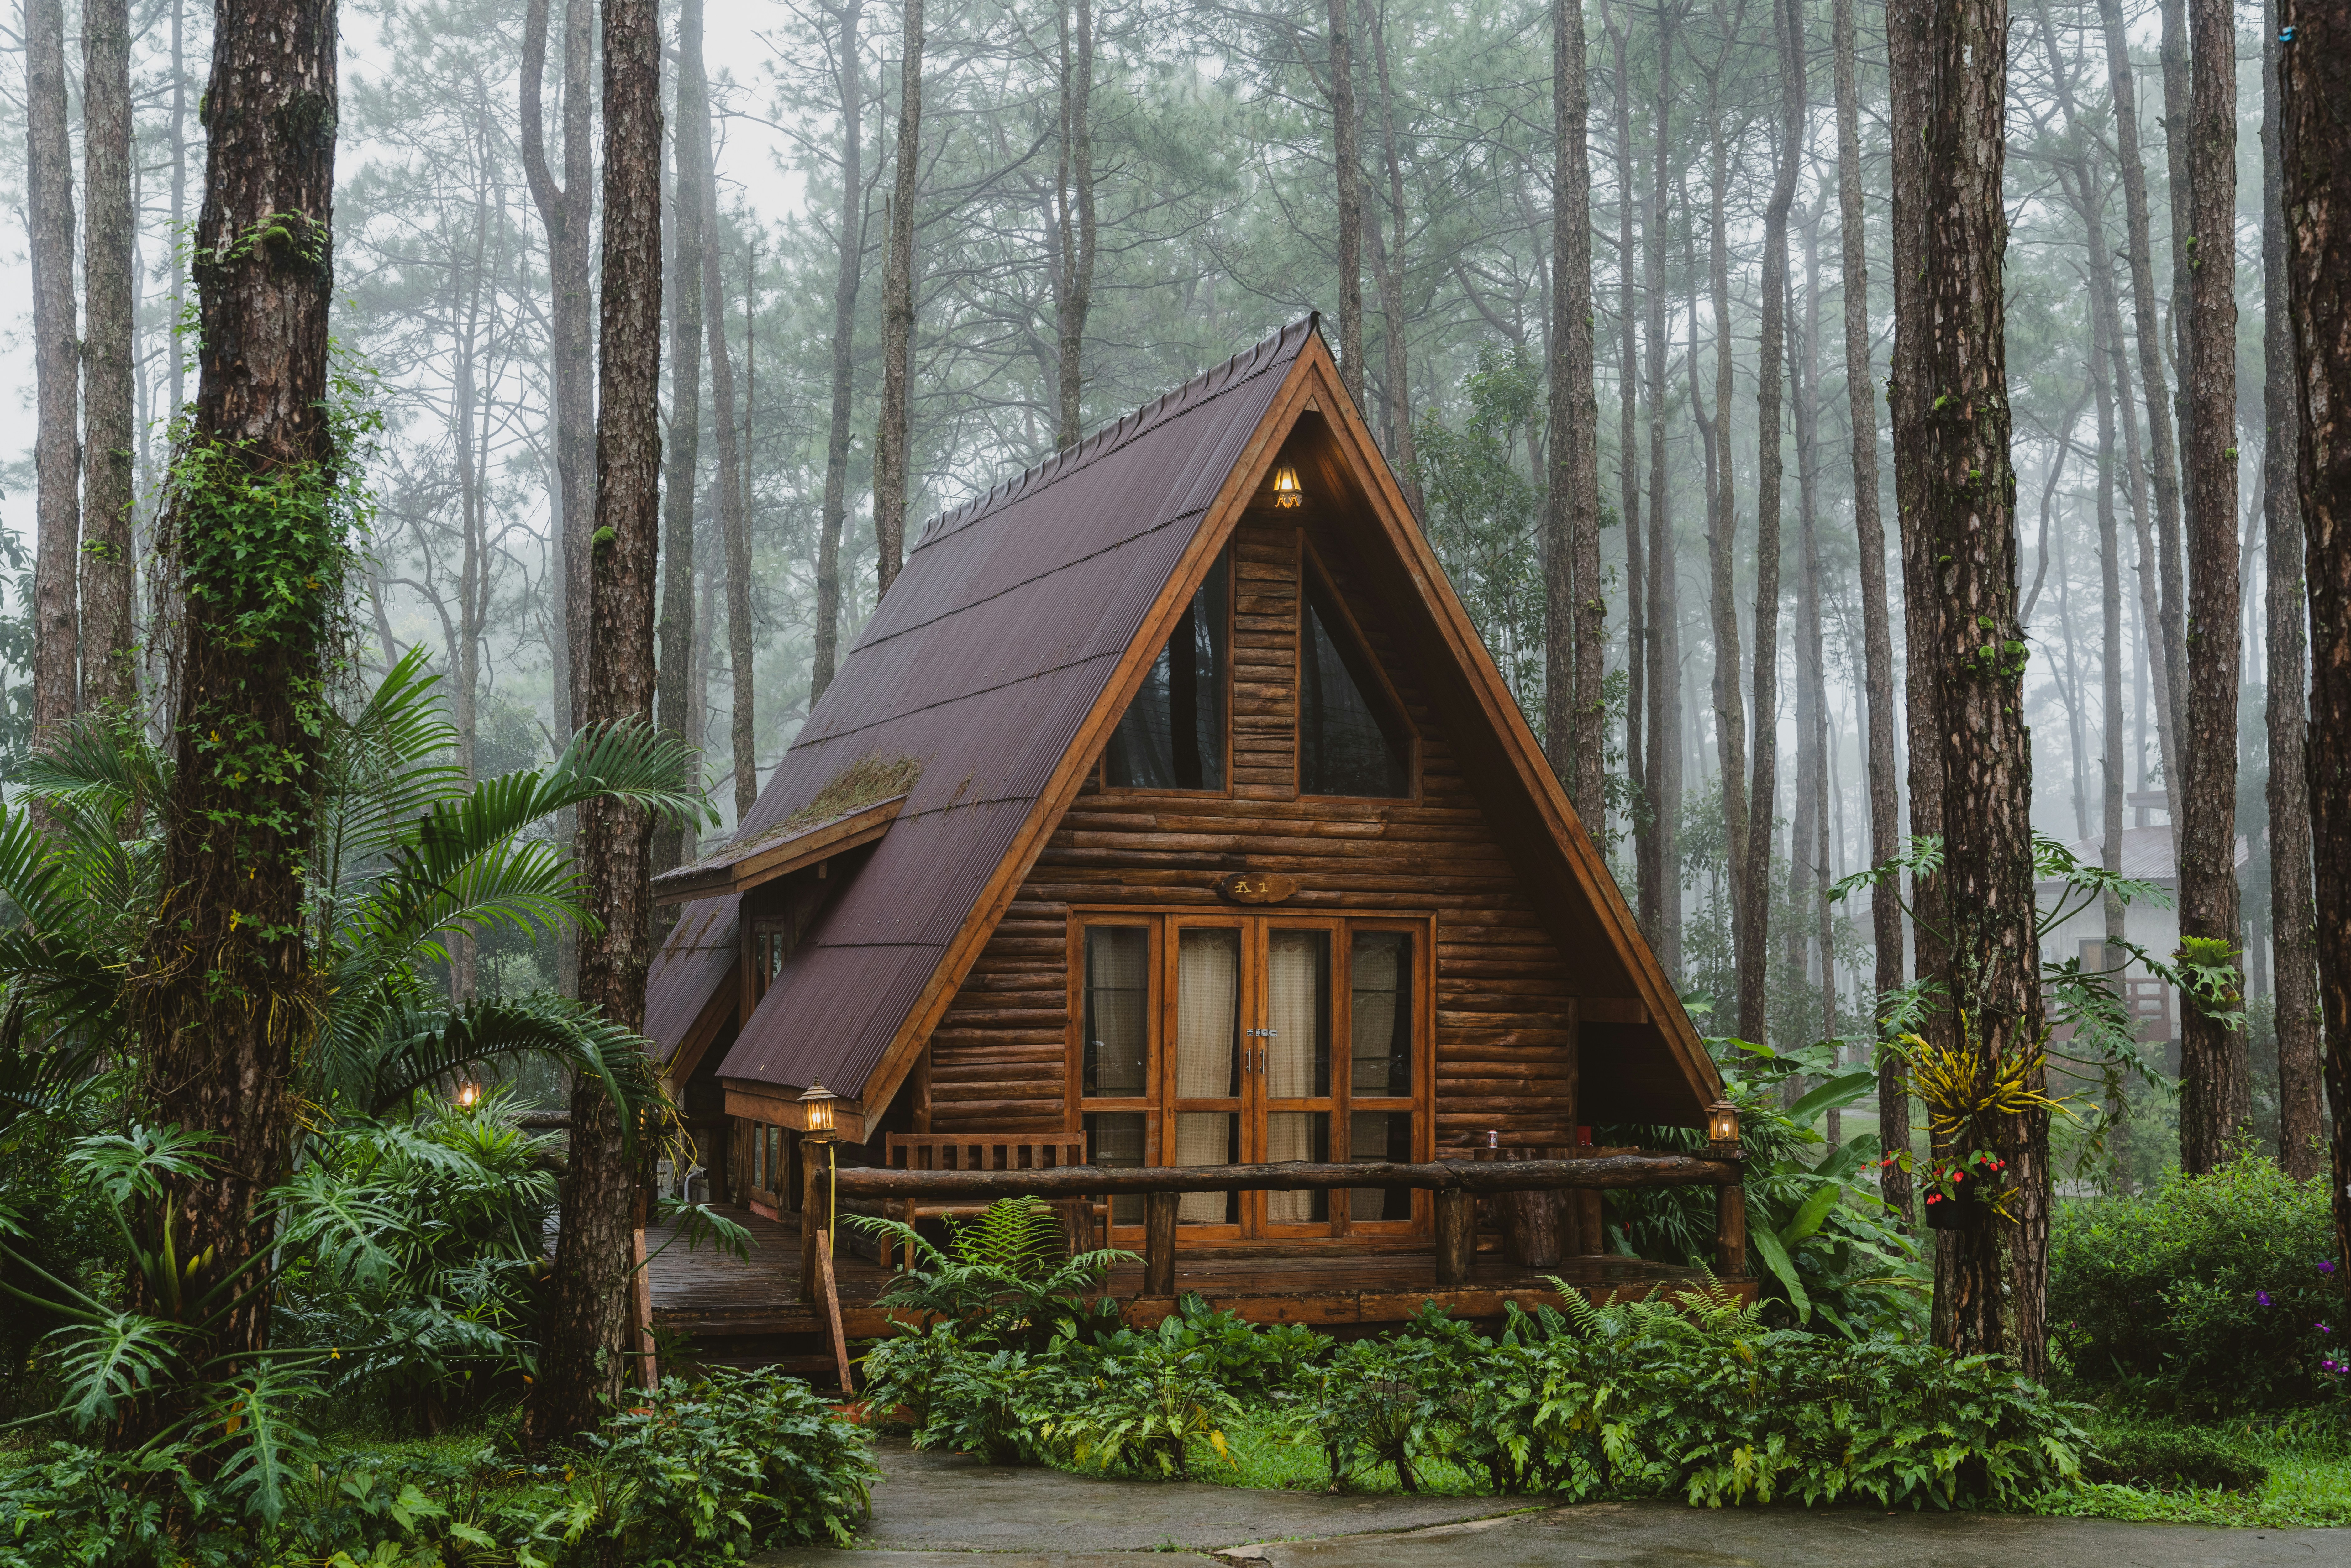 A apex roofed wooden cabin sitting within a tropical green misty forest in Northern Thailand.